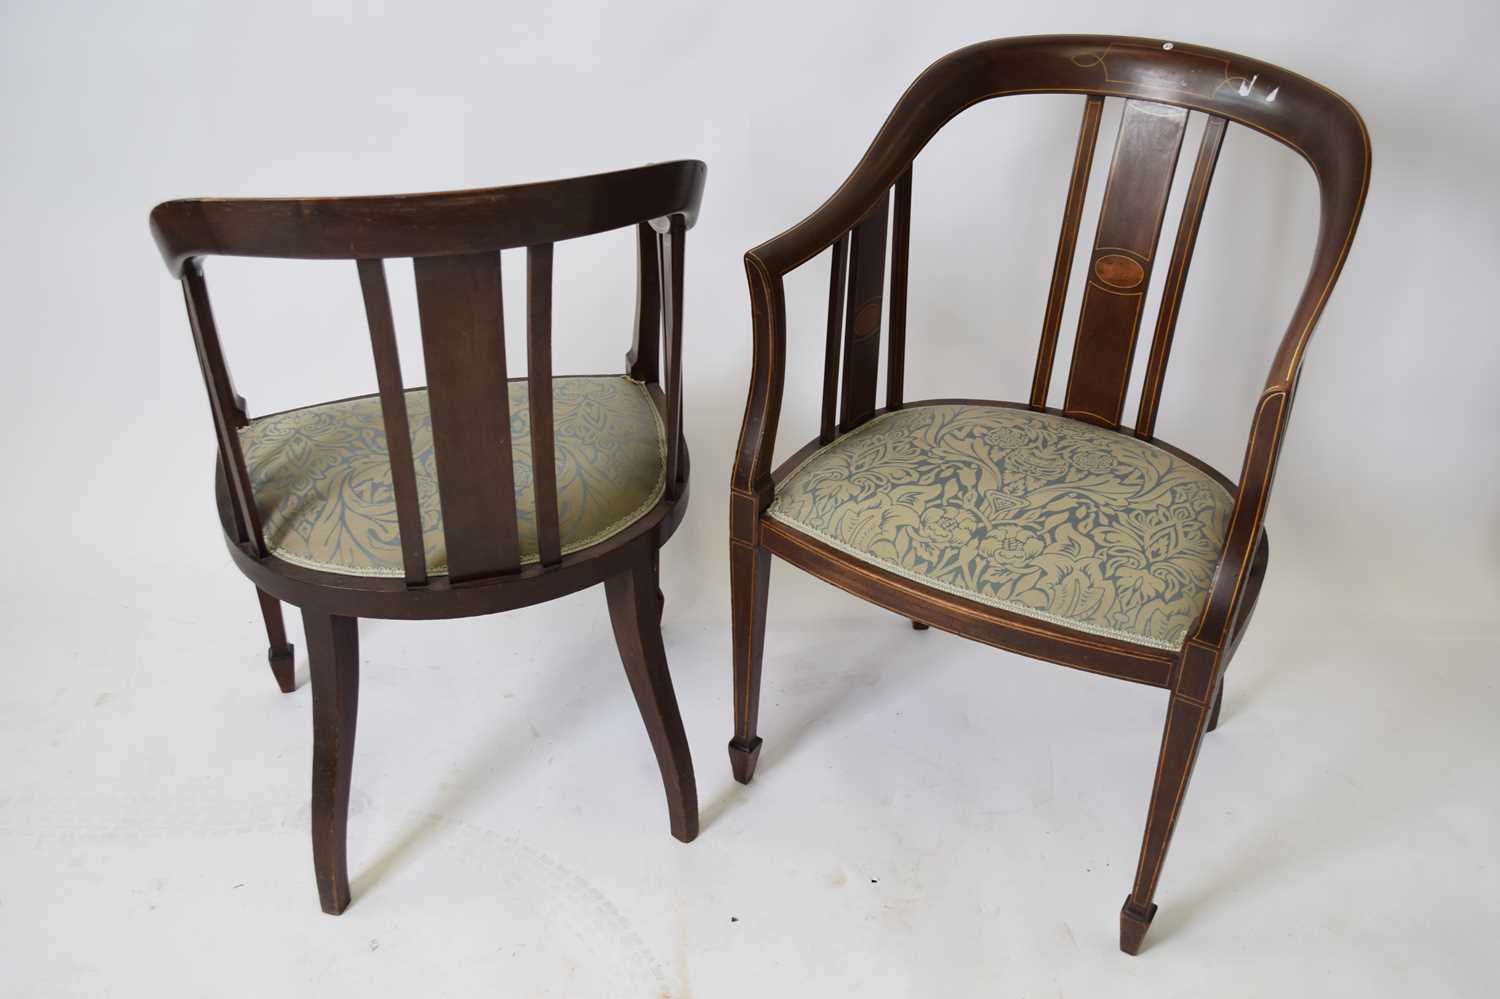 Pair of Edwardian mahogany framed bow back side chairs with blue floral upholstered seats, set on - Image 3 of 3